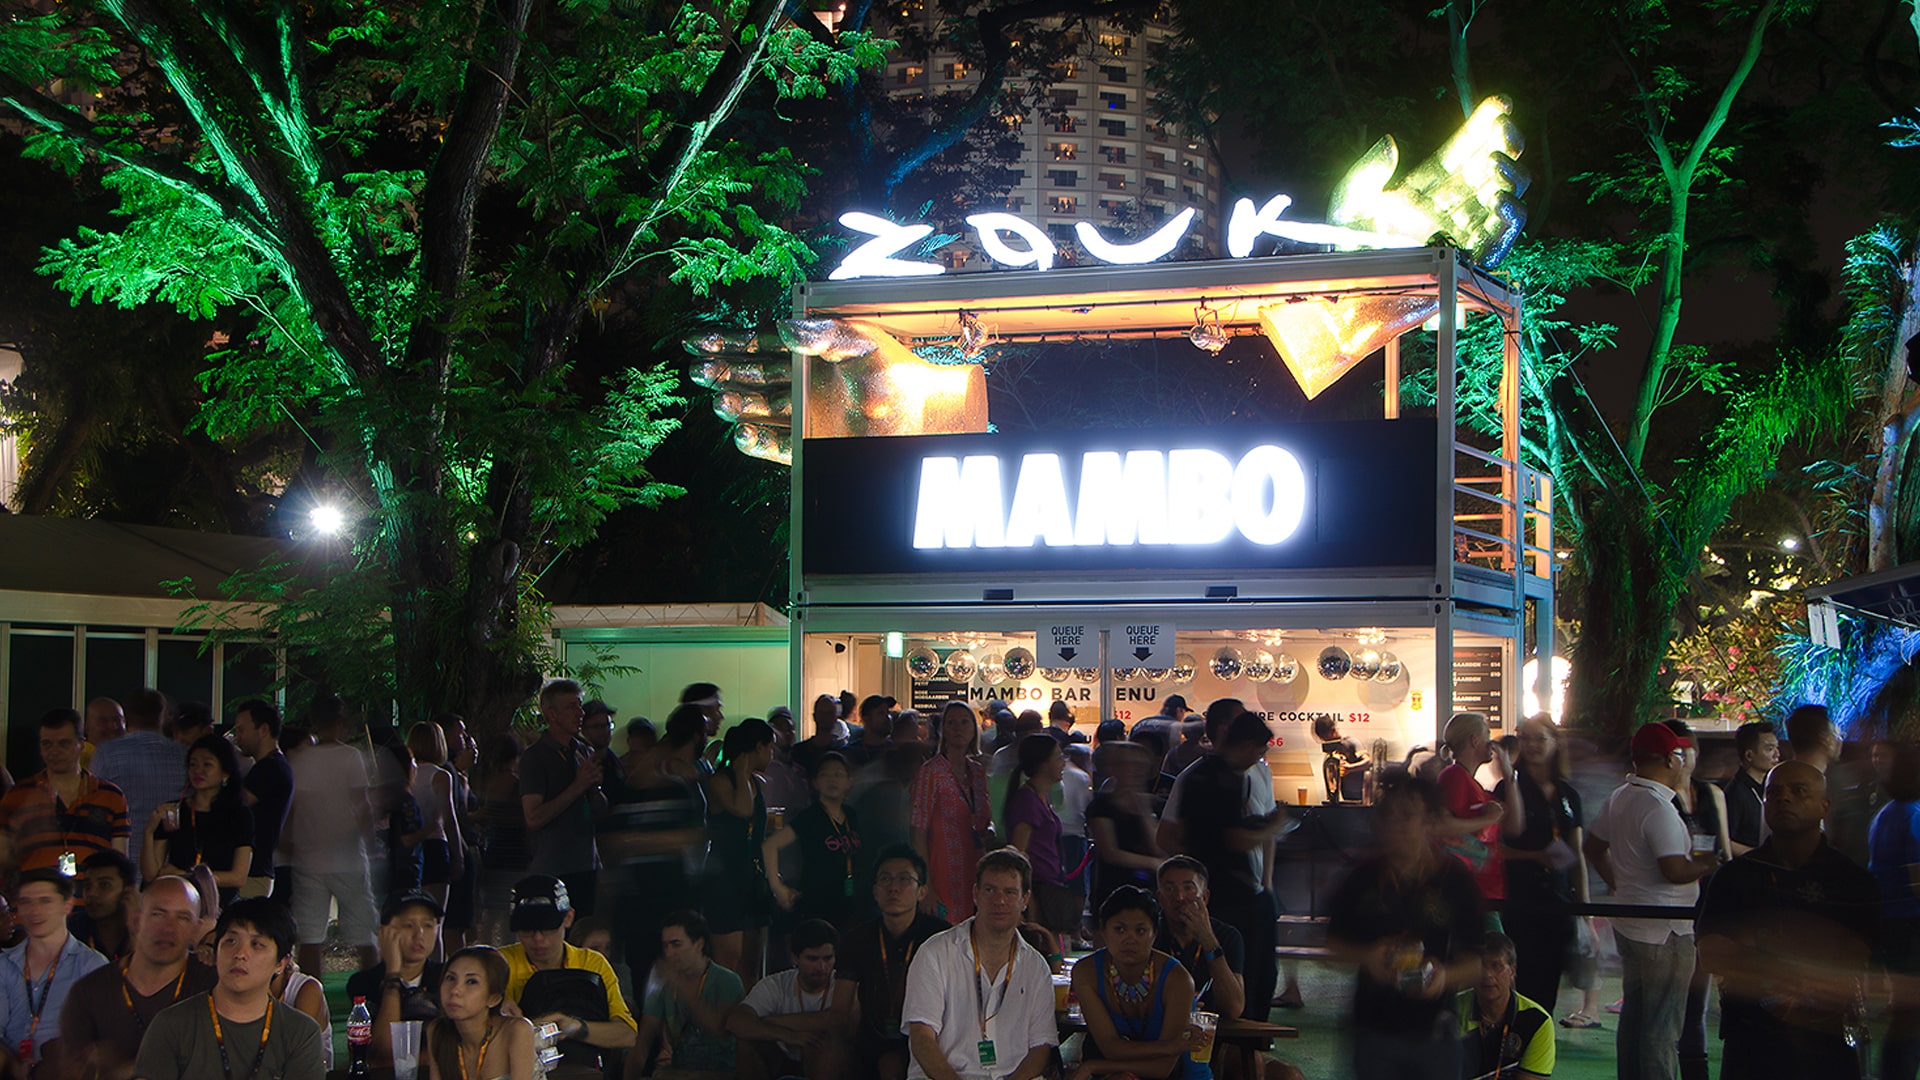 tsc_opt-images_customized-containers_mambo-bar_1920x1080-03-min